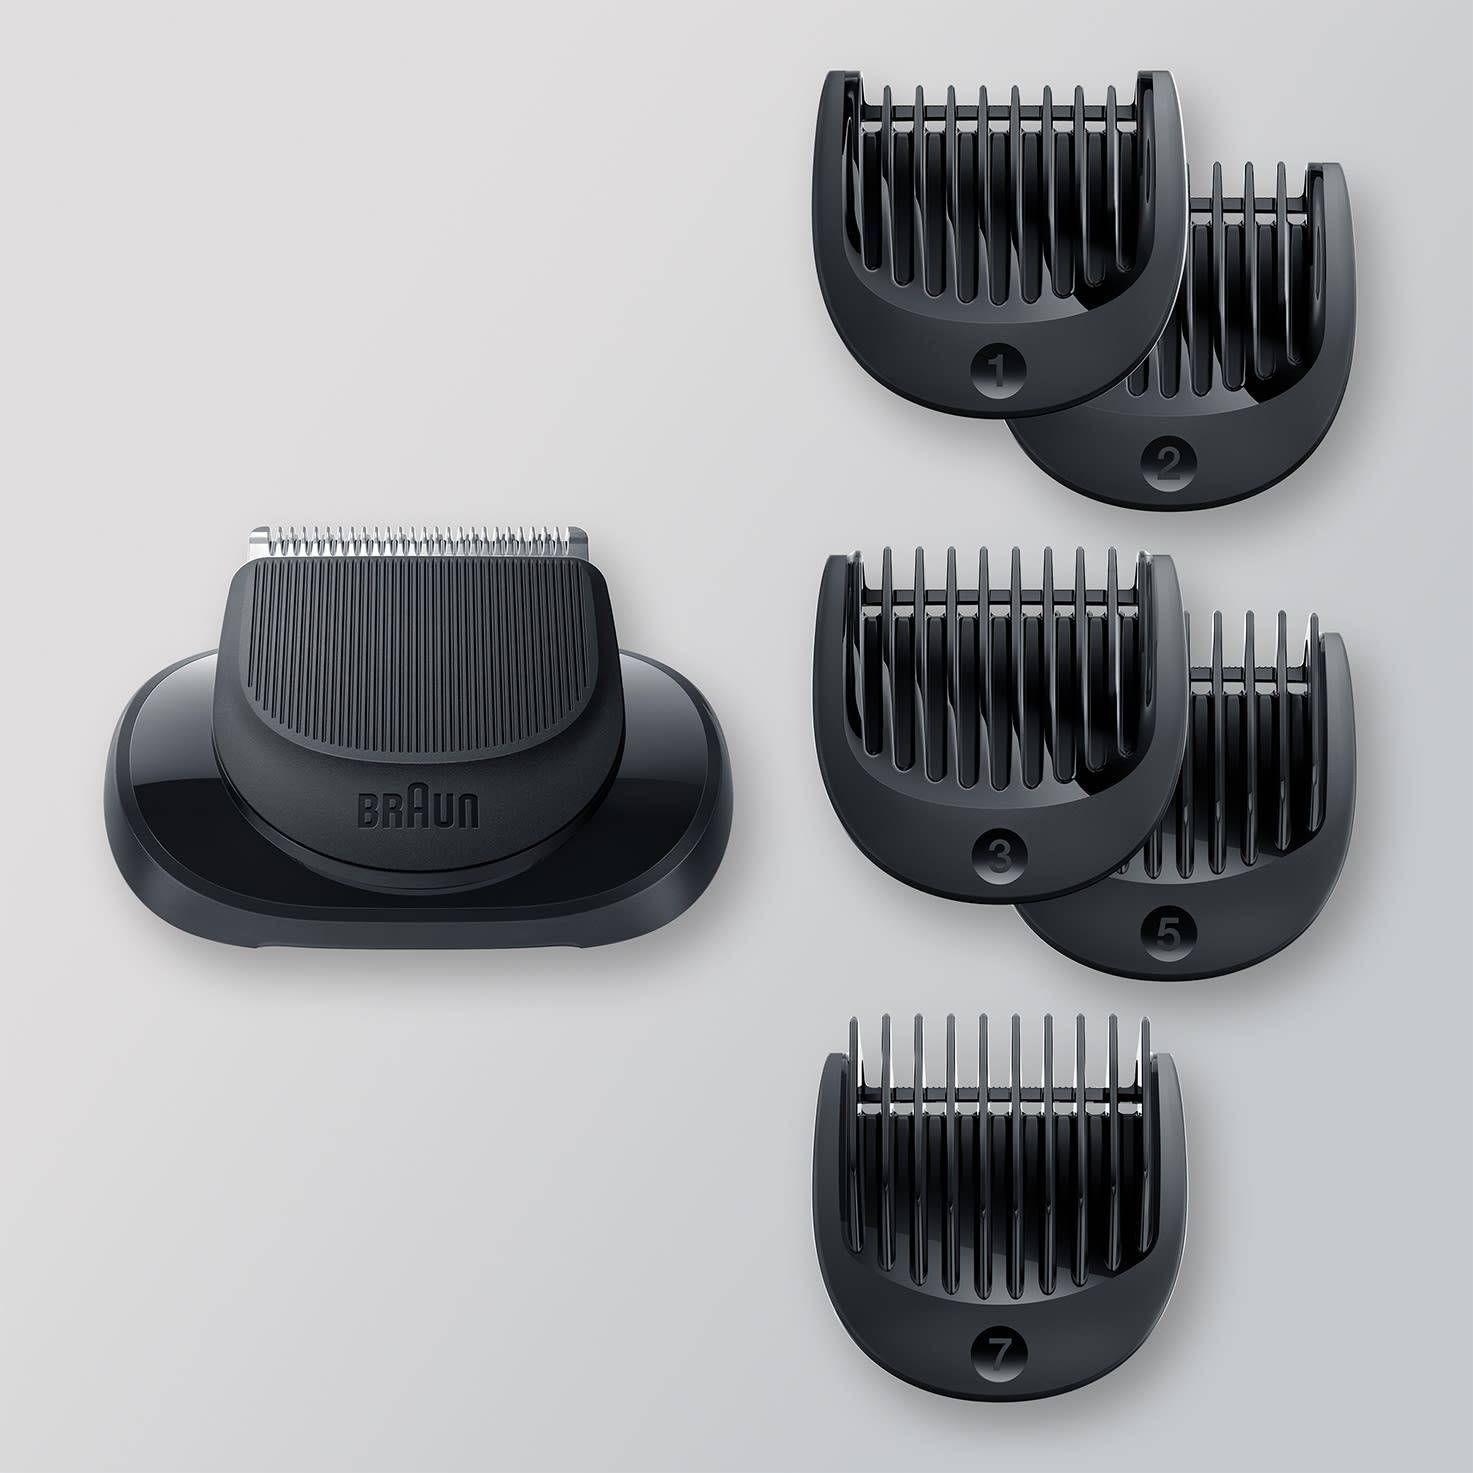 Braun EasyClick Beard Trimmer Attachment for Braun Series 5, 6 and 7 Shaver - 2020 Models Only - Healthxpress.ie